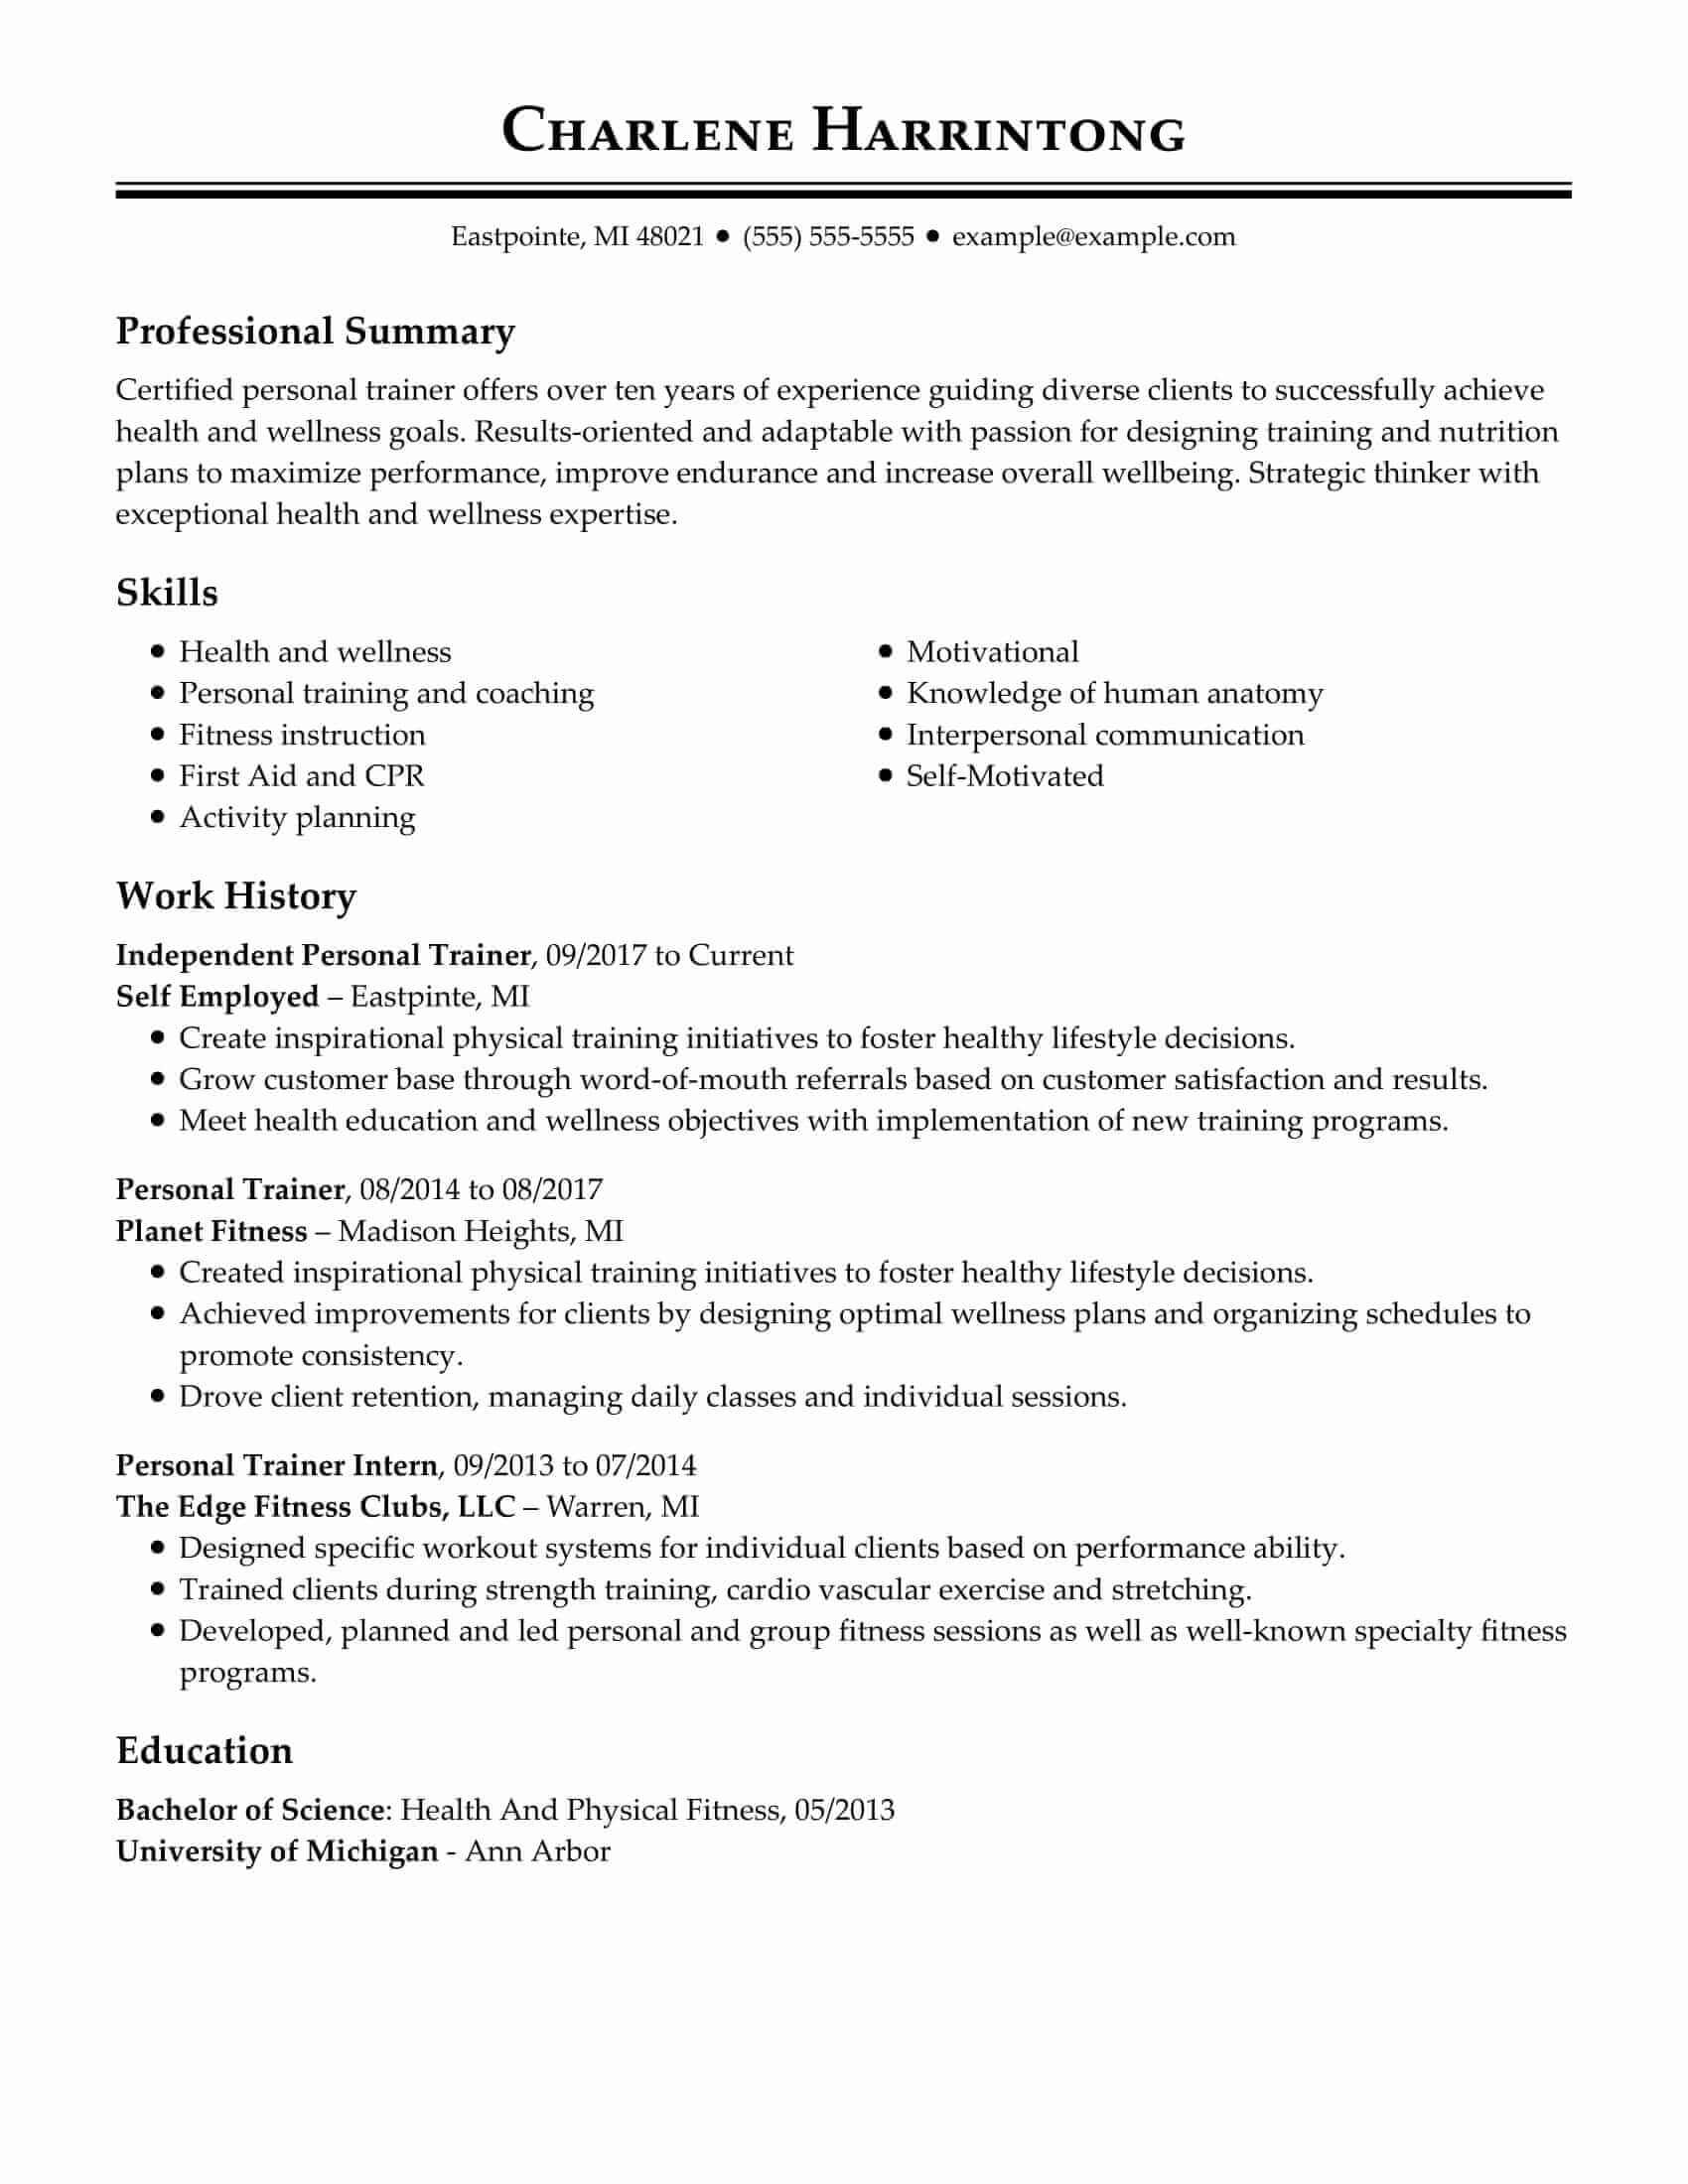 Resume Sample for Change In Career From Psychology to Nutrition Personal Trainer Free Resume Templates   How-to Guide